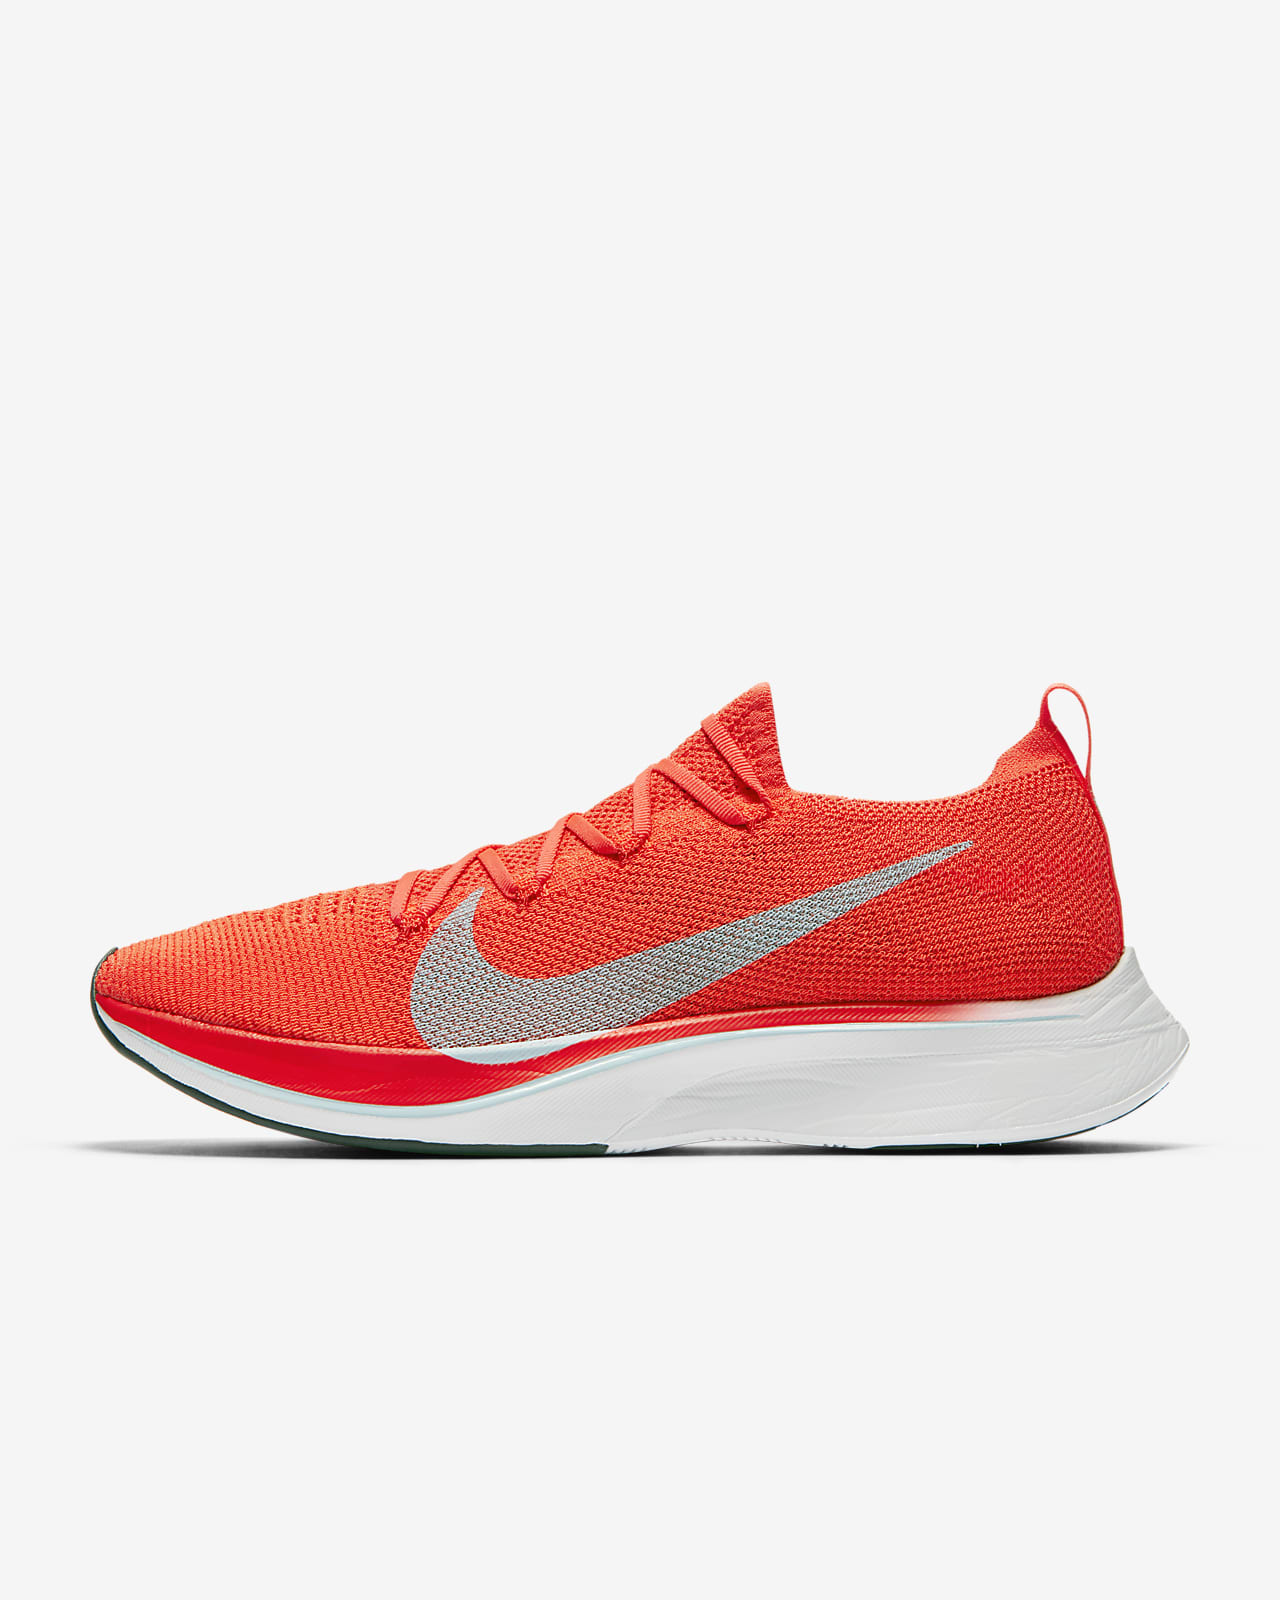 new red nike shoes